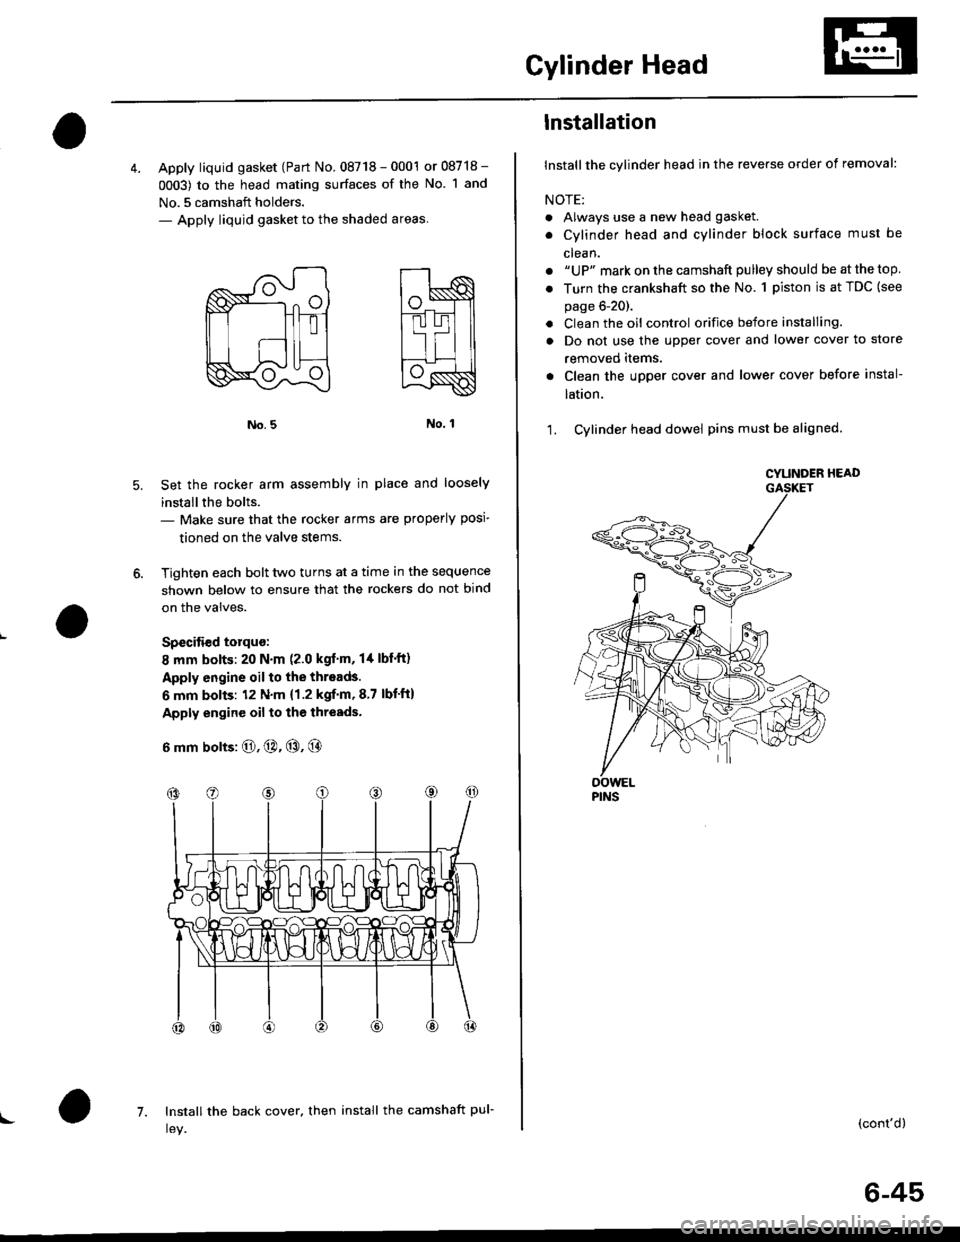 HONDA CIVIC 1999 6.G Workshop Manual Cylinder Head
4. Apply liquid gasket (Part No. 08718 - 0001 or 08718 -
0003) to the head mating surfaces of the No. 1 and
No.5 camshaft holders.- Apply liquid gasket to the shaded areas
Set the rocker